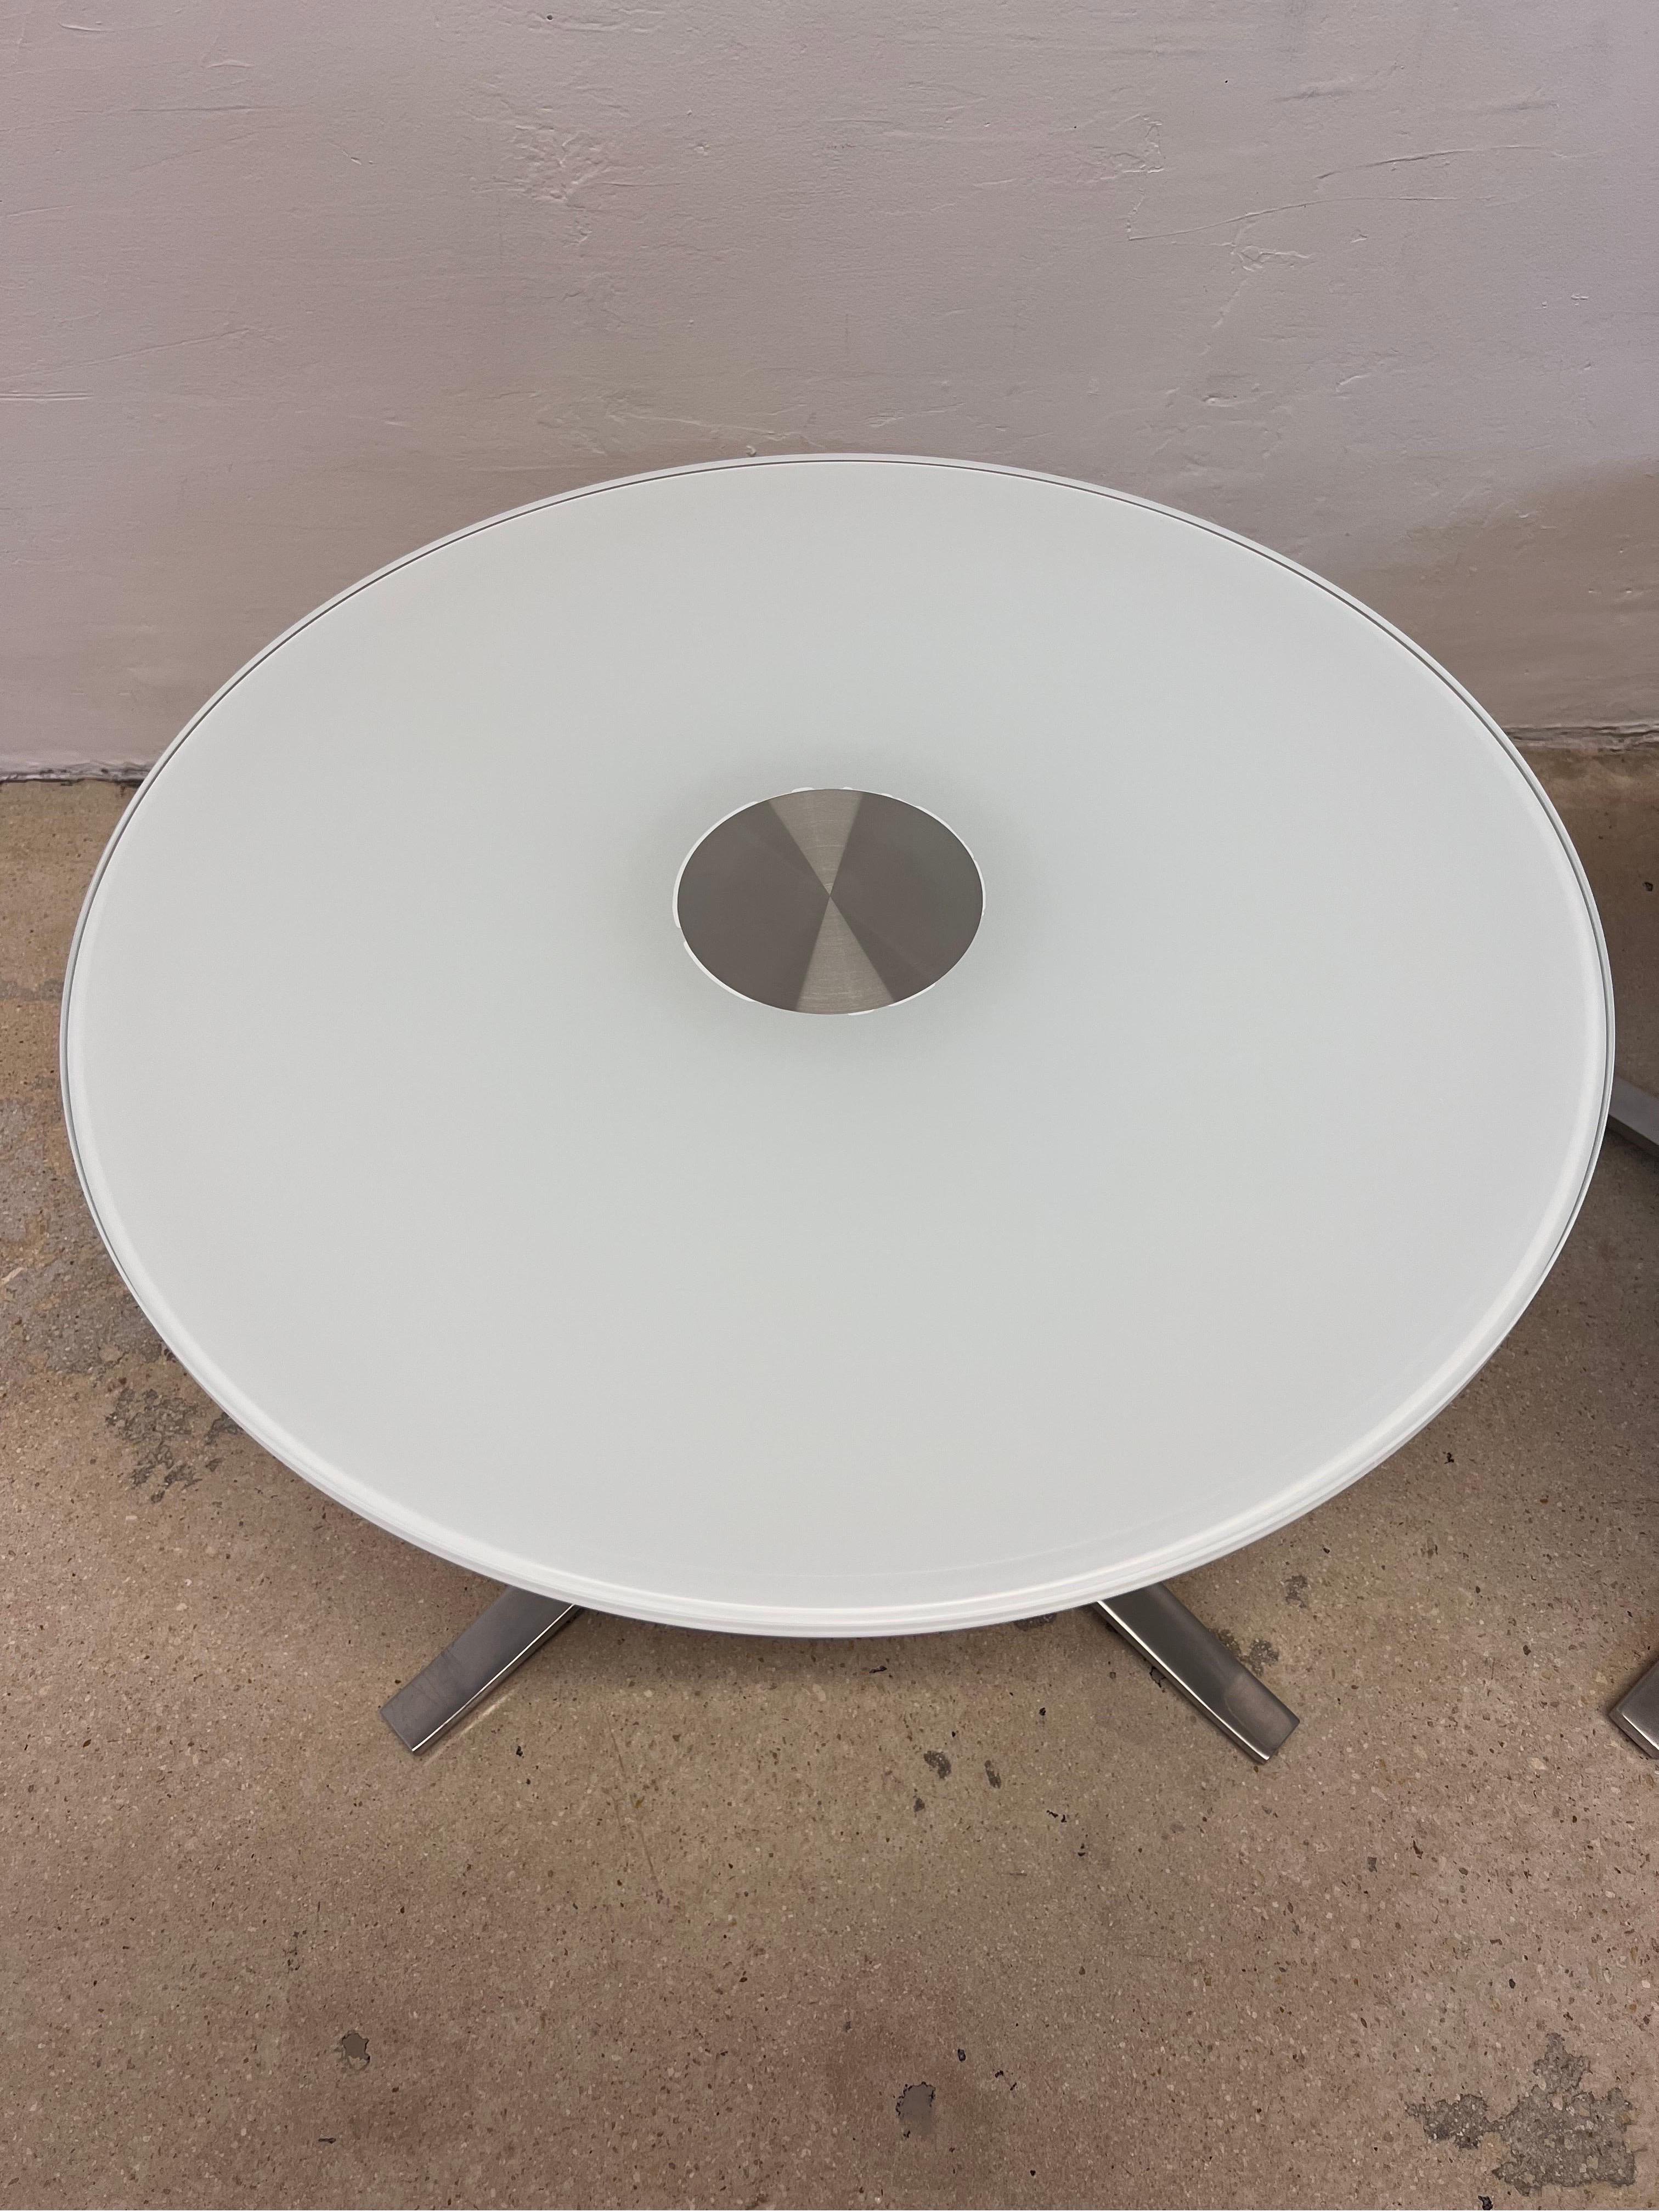 Pearson Lloyd Bob's Side Tables With Round Glass Tops for Coalesse, a Pair For Sale 3